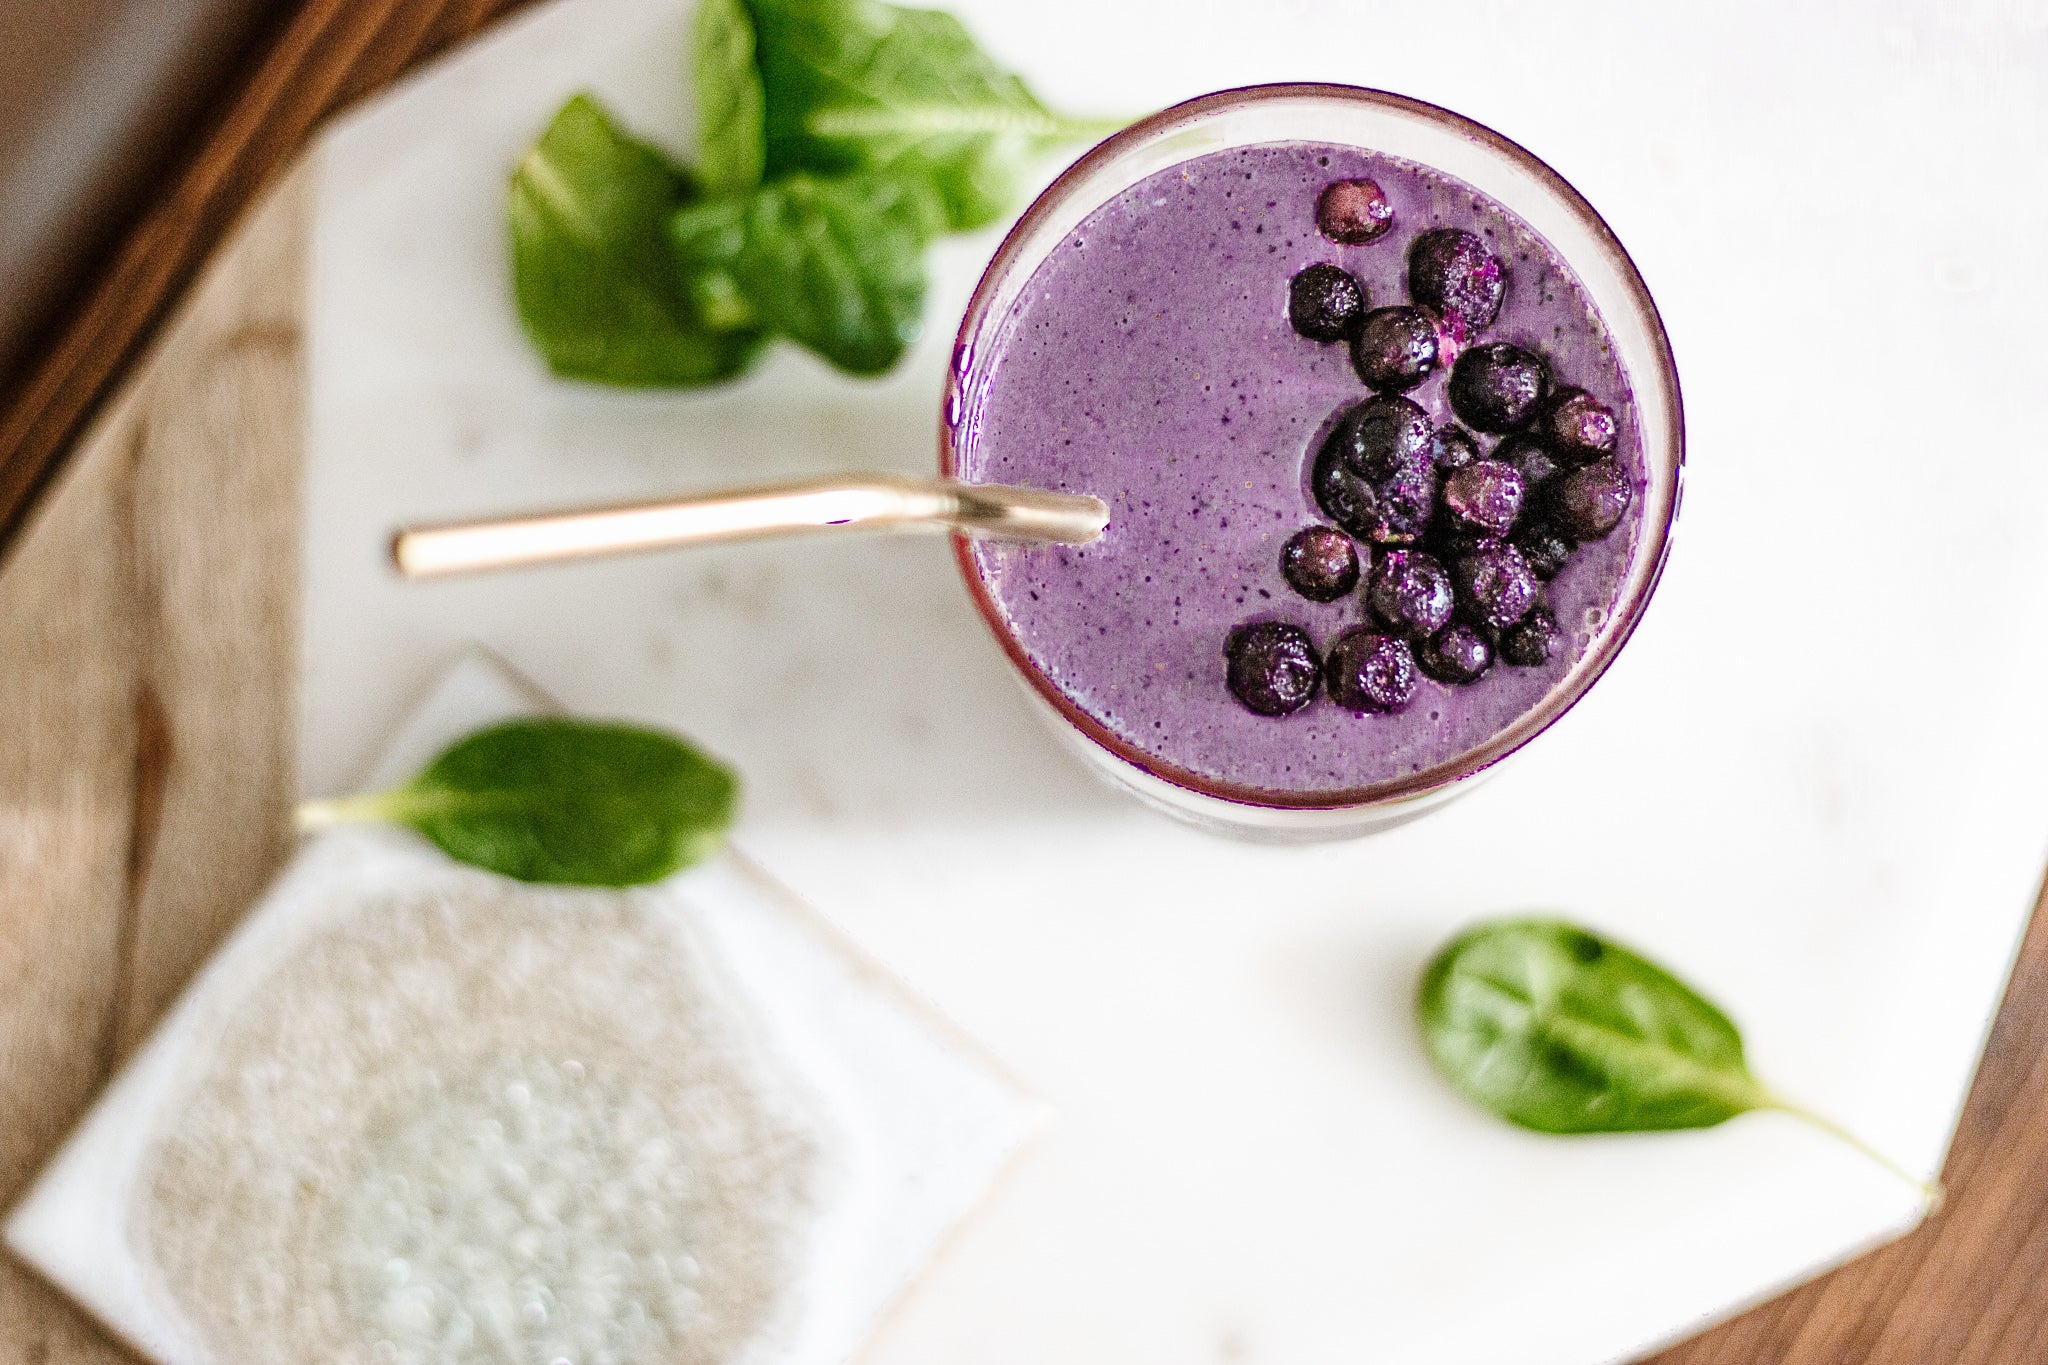 Heart Smart Blueberry Spinach Smoothie